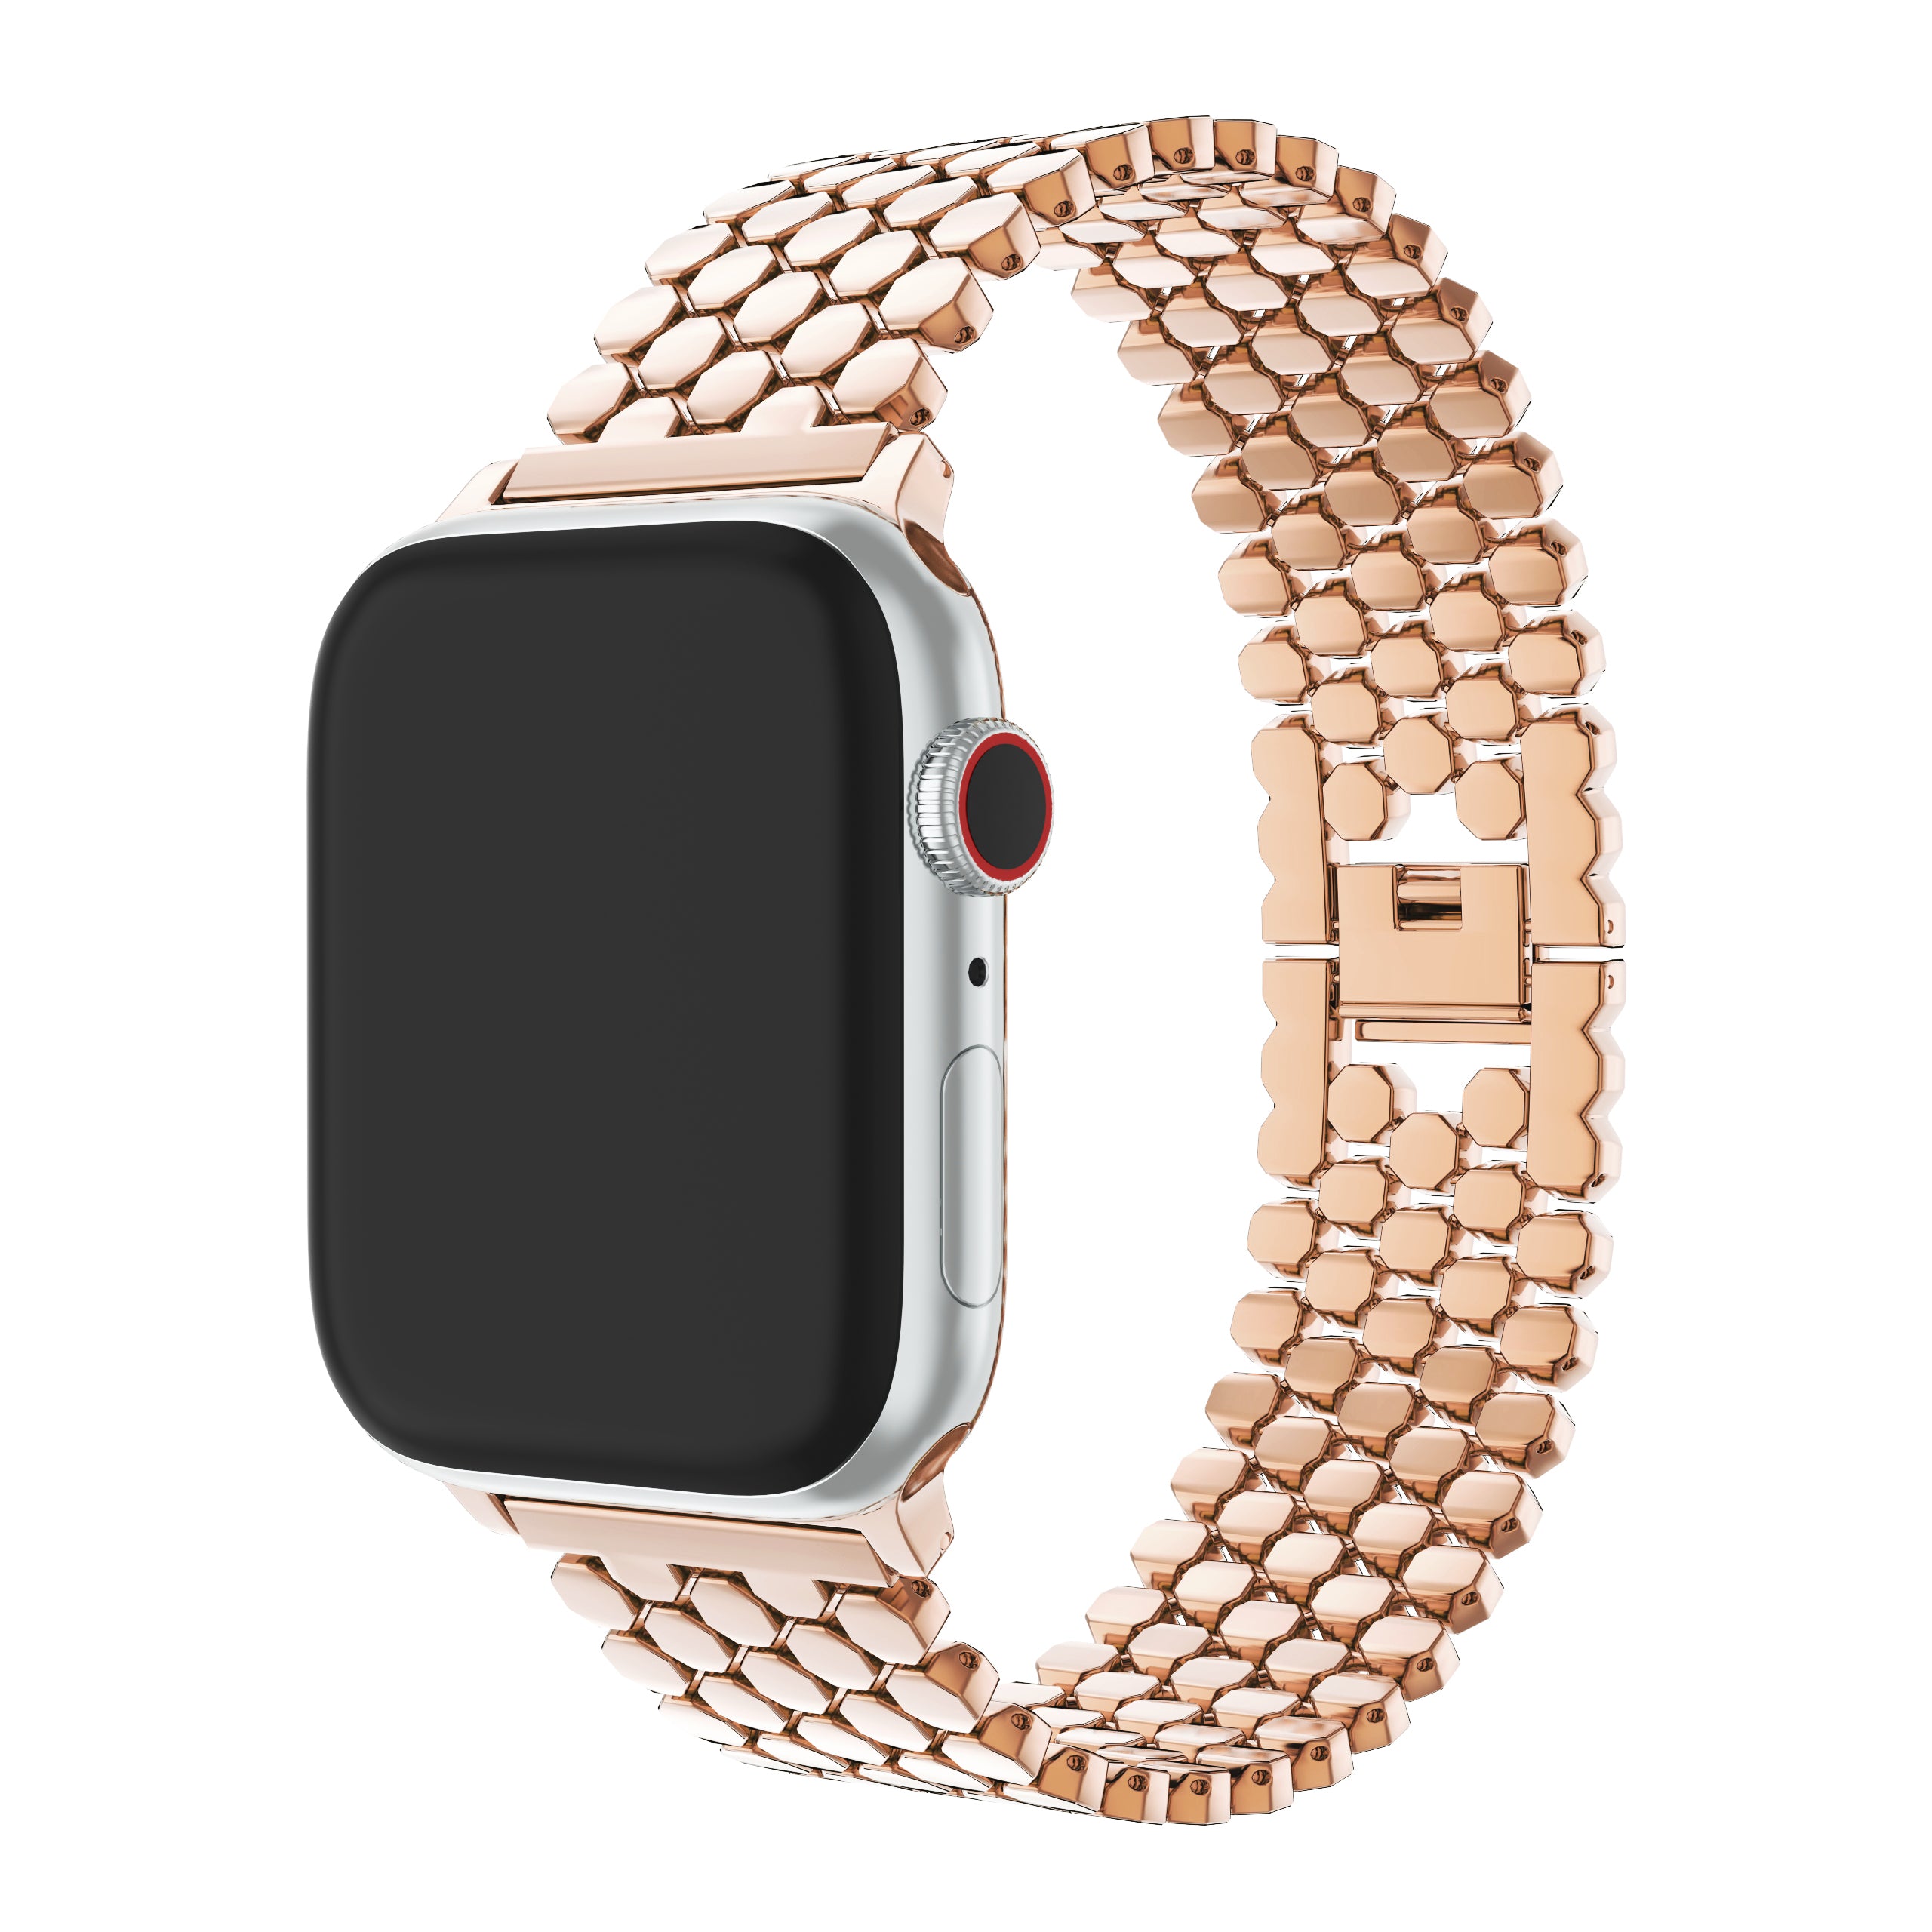 Circle Stainless Steel Band For Apple | Triple Theta